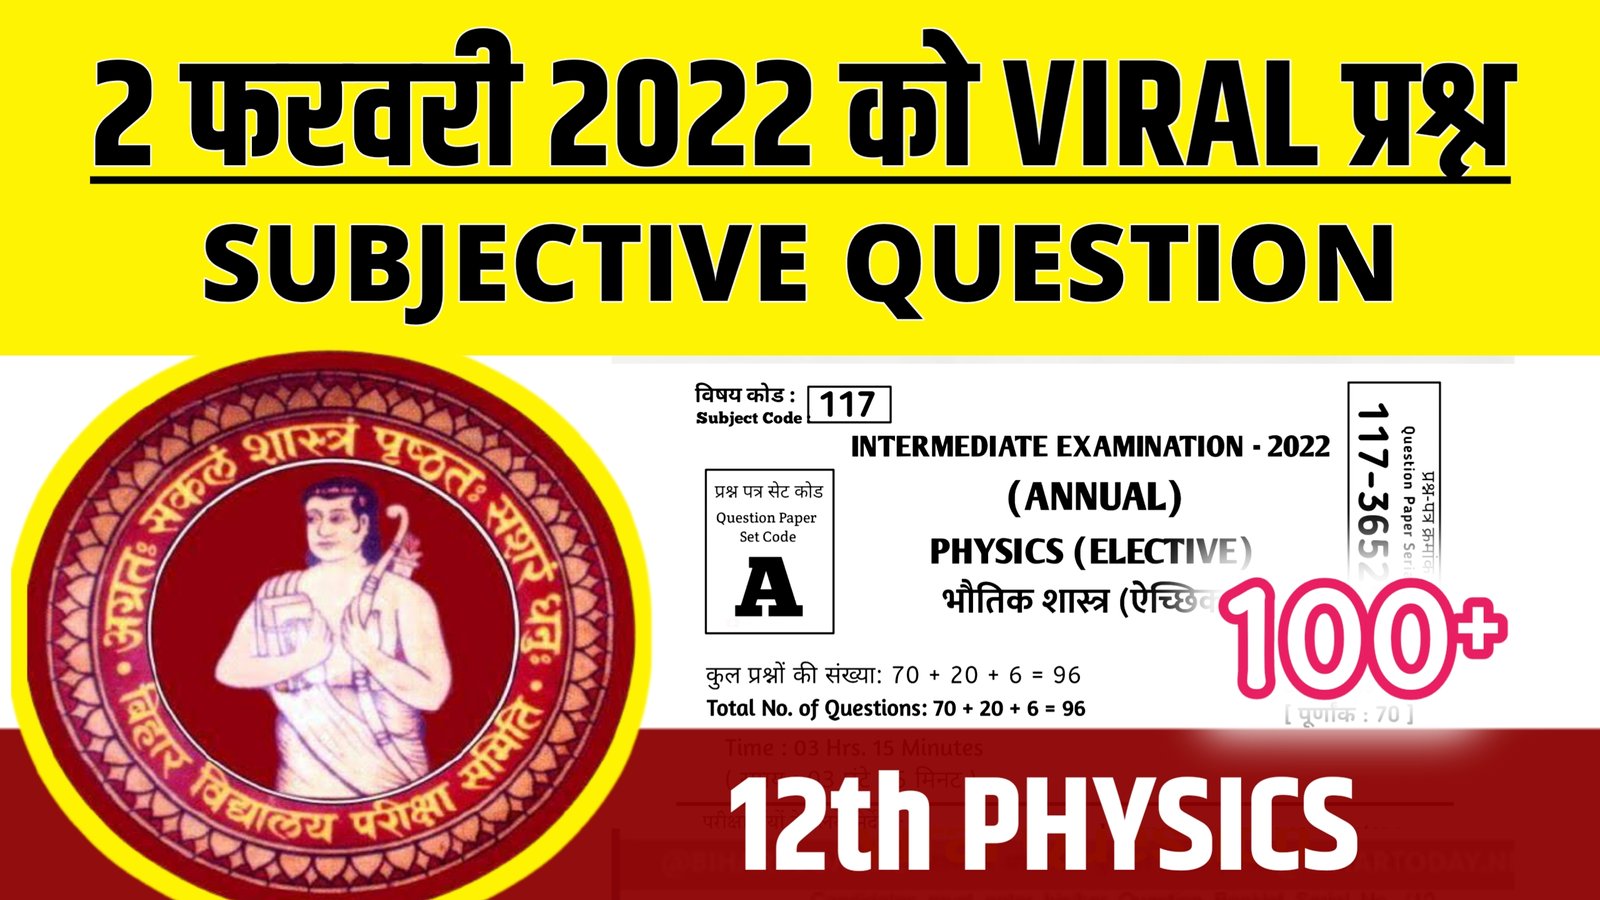 12th Physics Subjective Question 2022